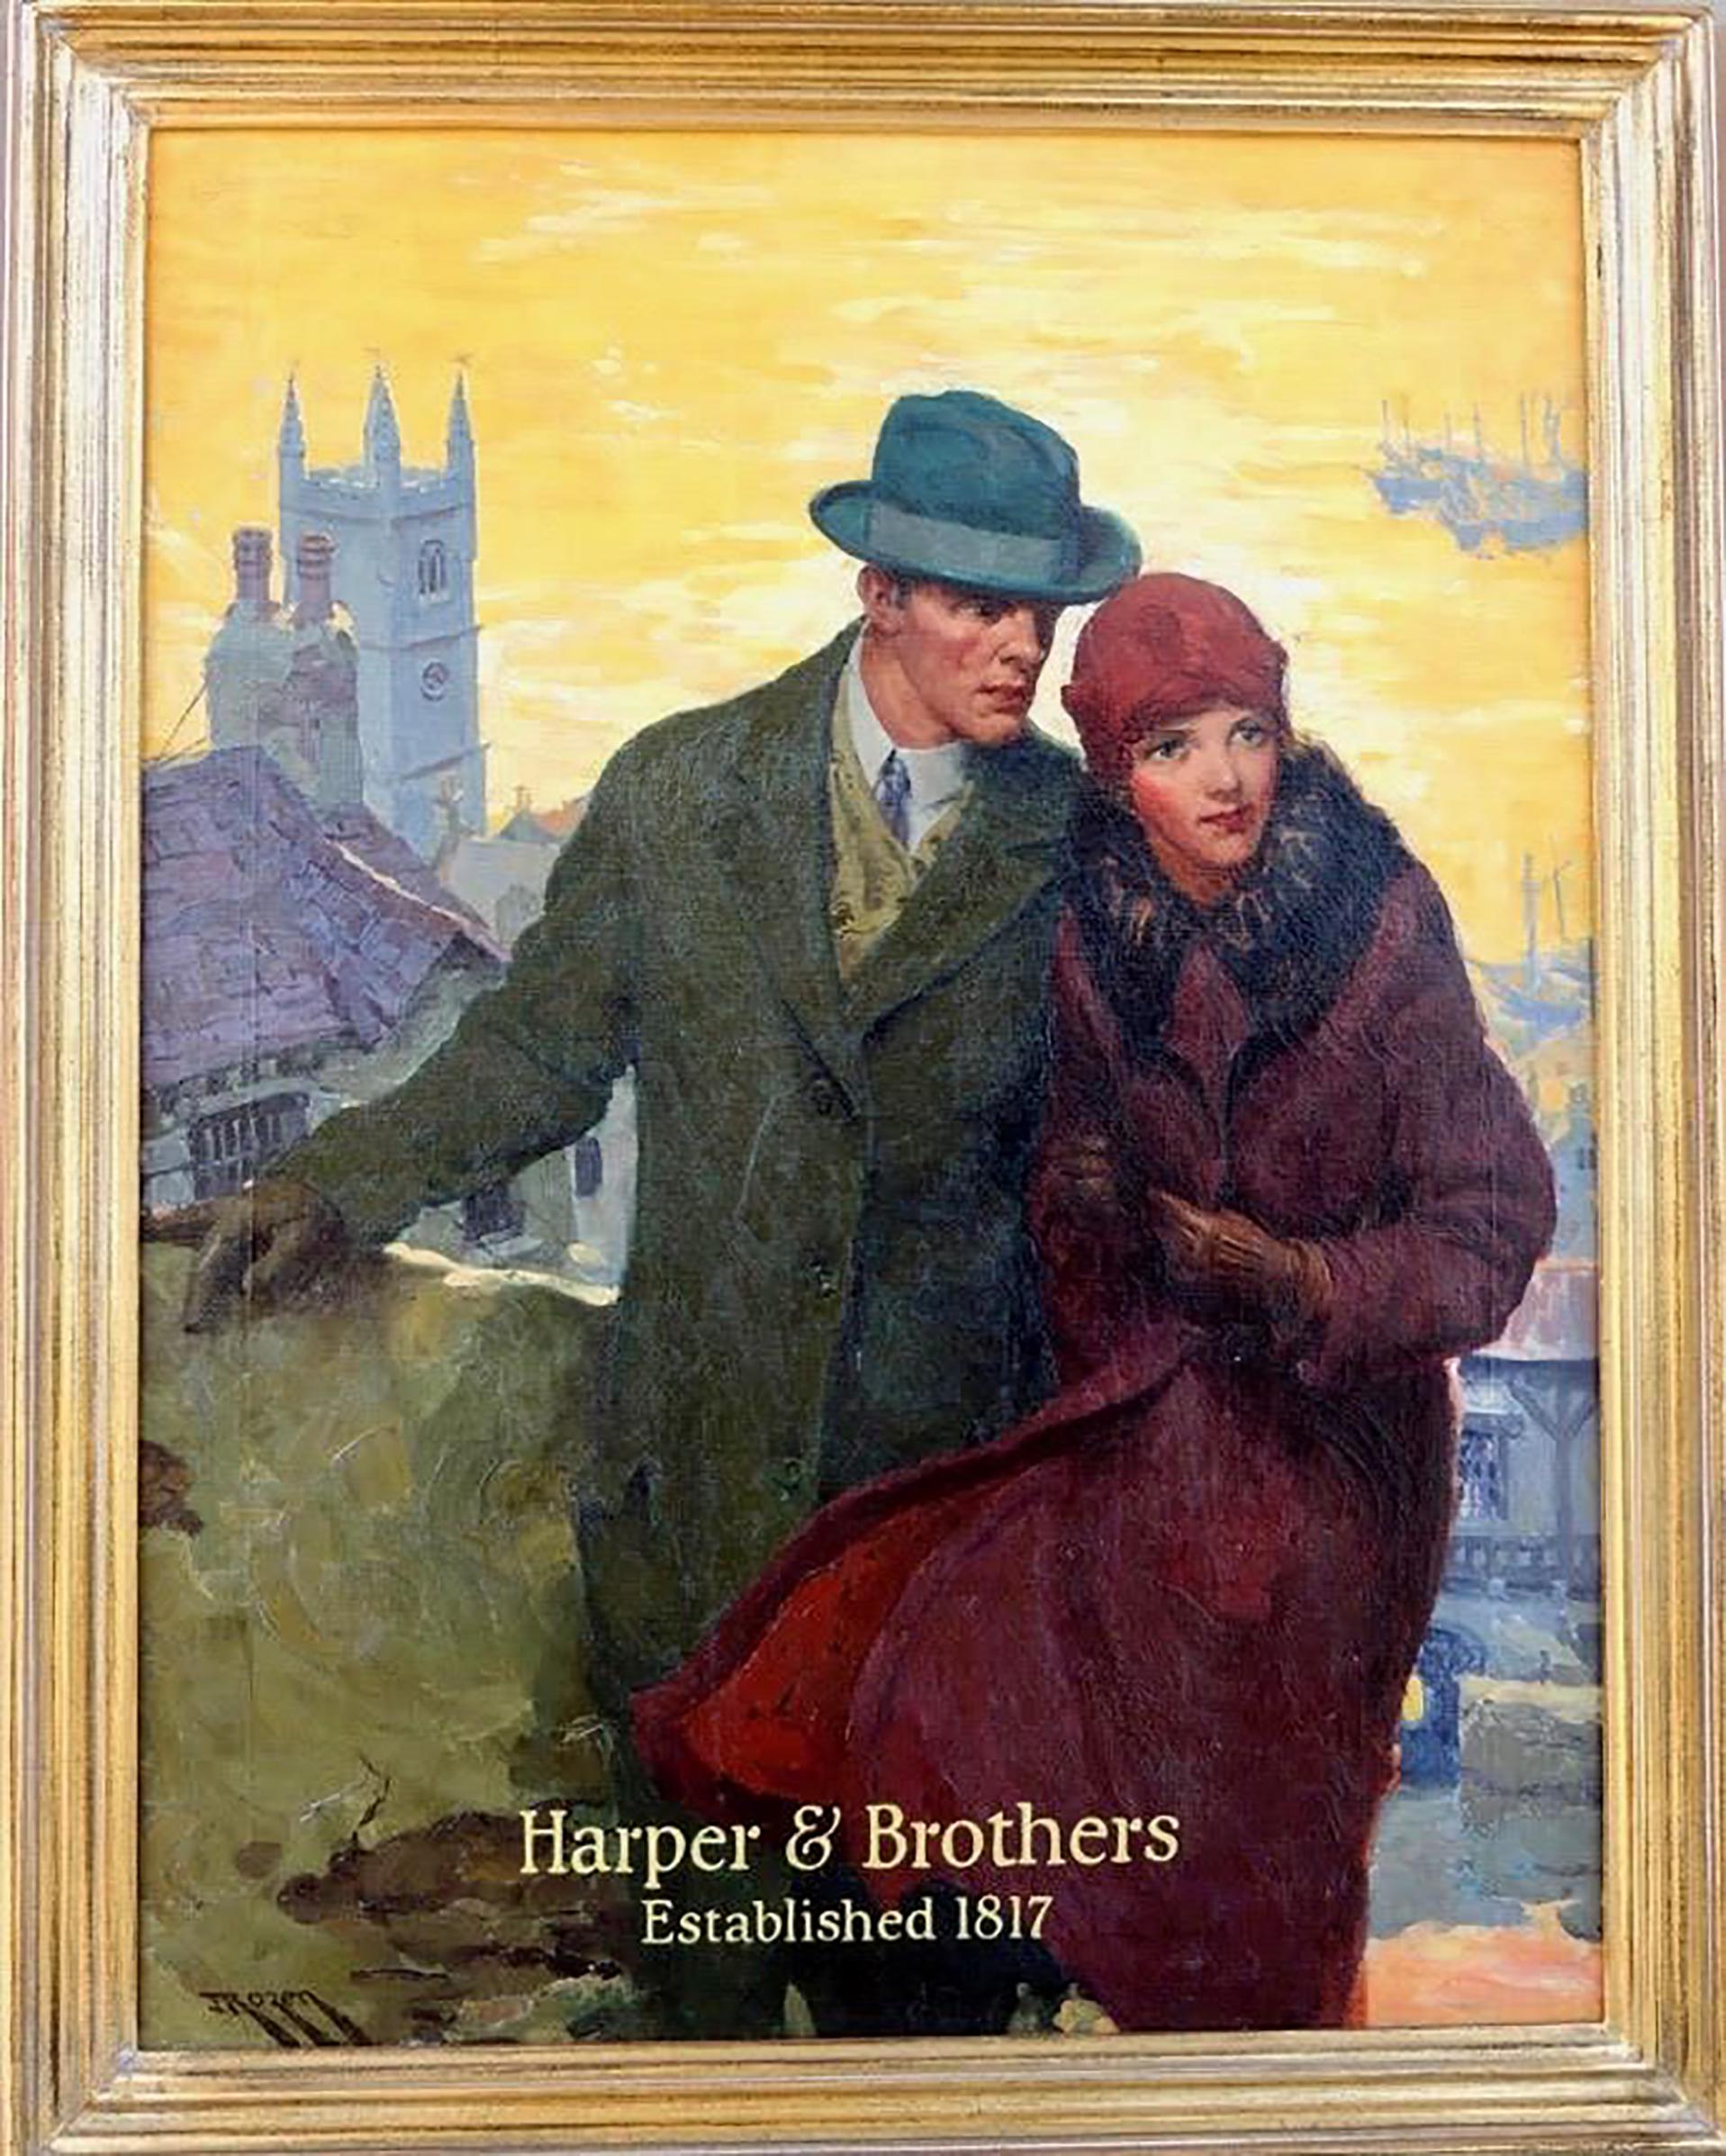 Harper & Brothers Advertisement - Painting by Jerome Rozen